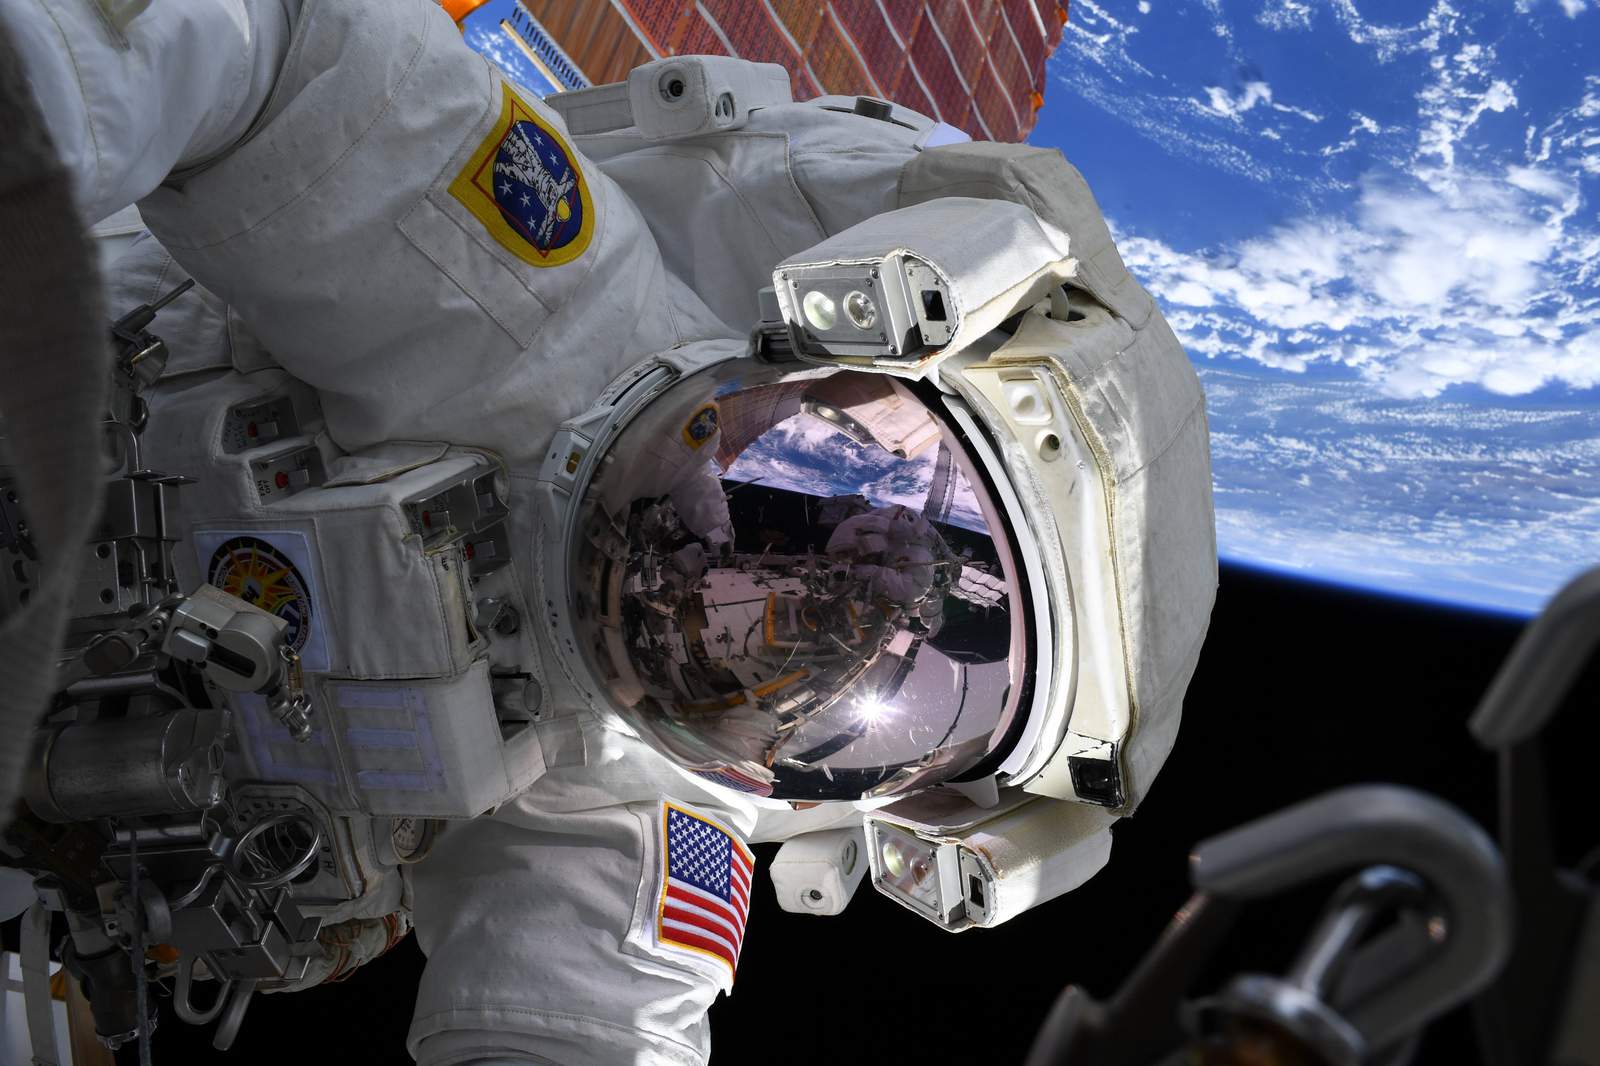 NASA is now accepting applications for new astronauts